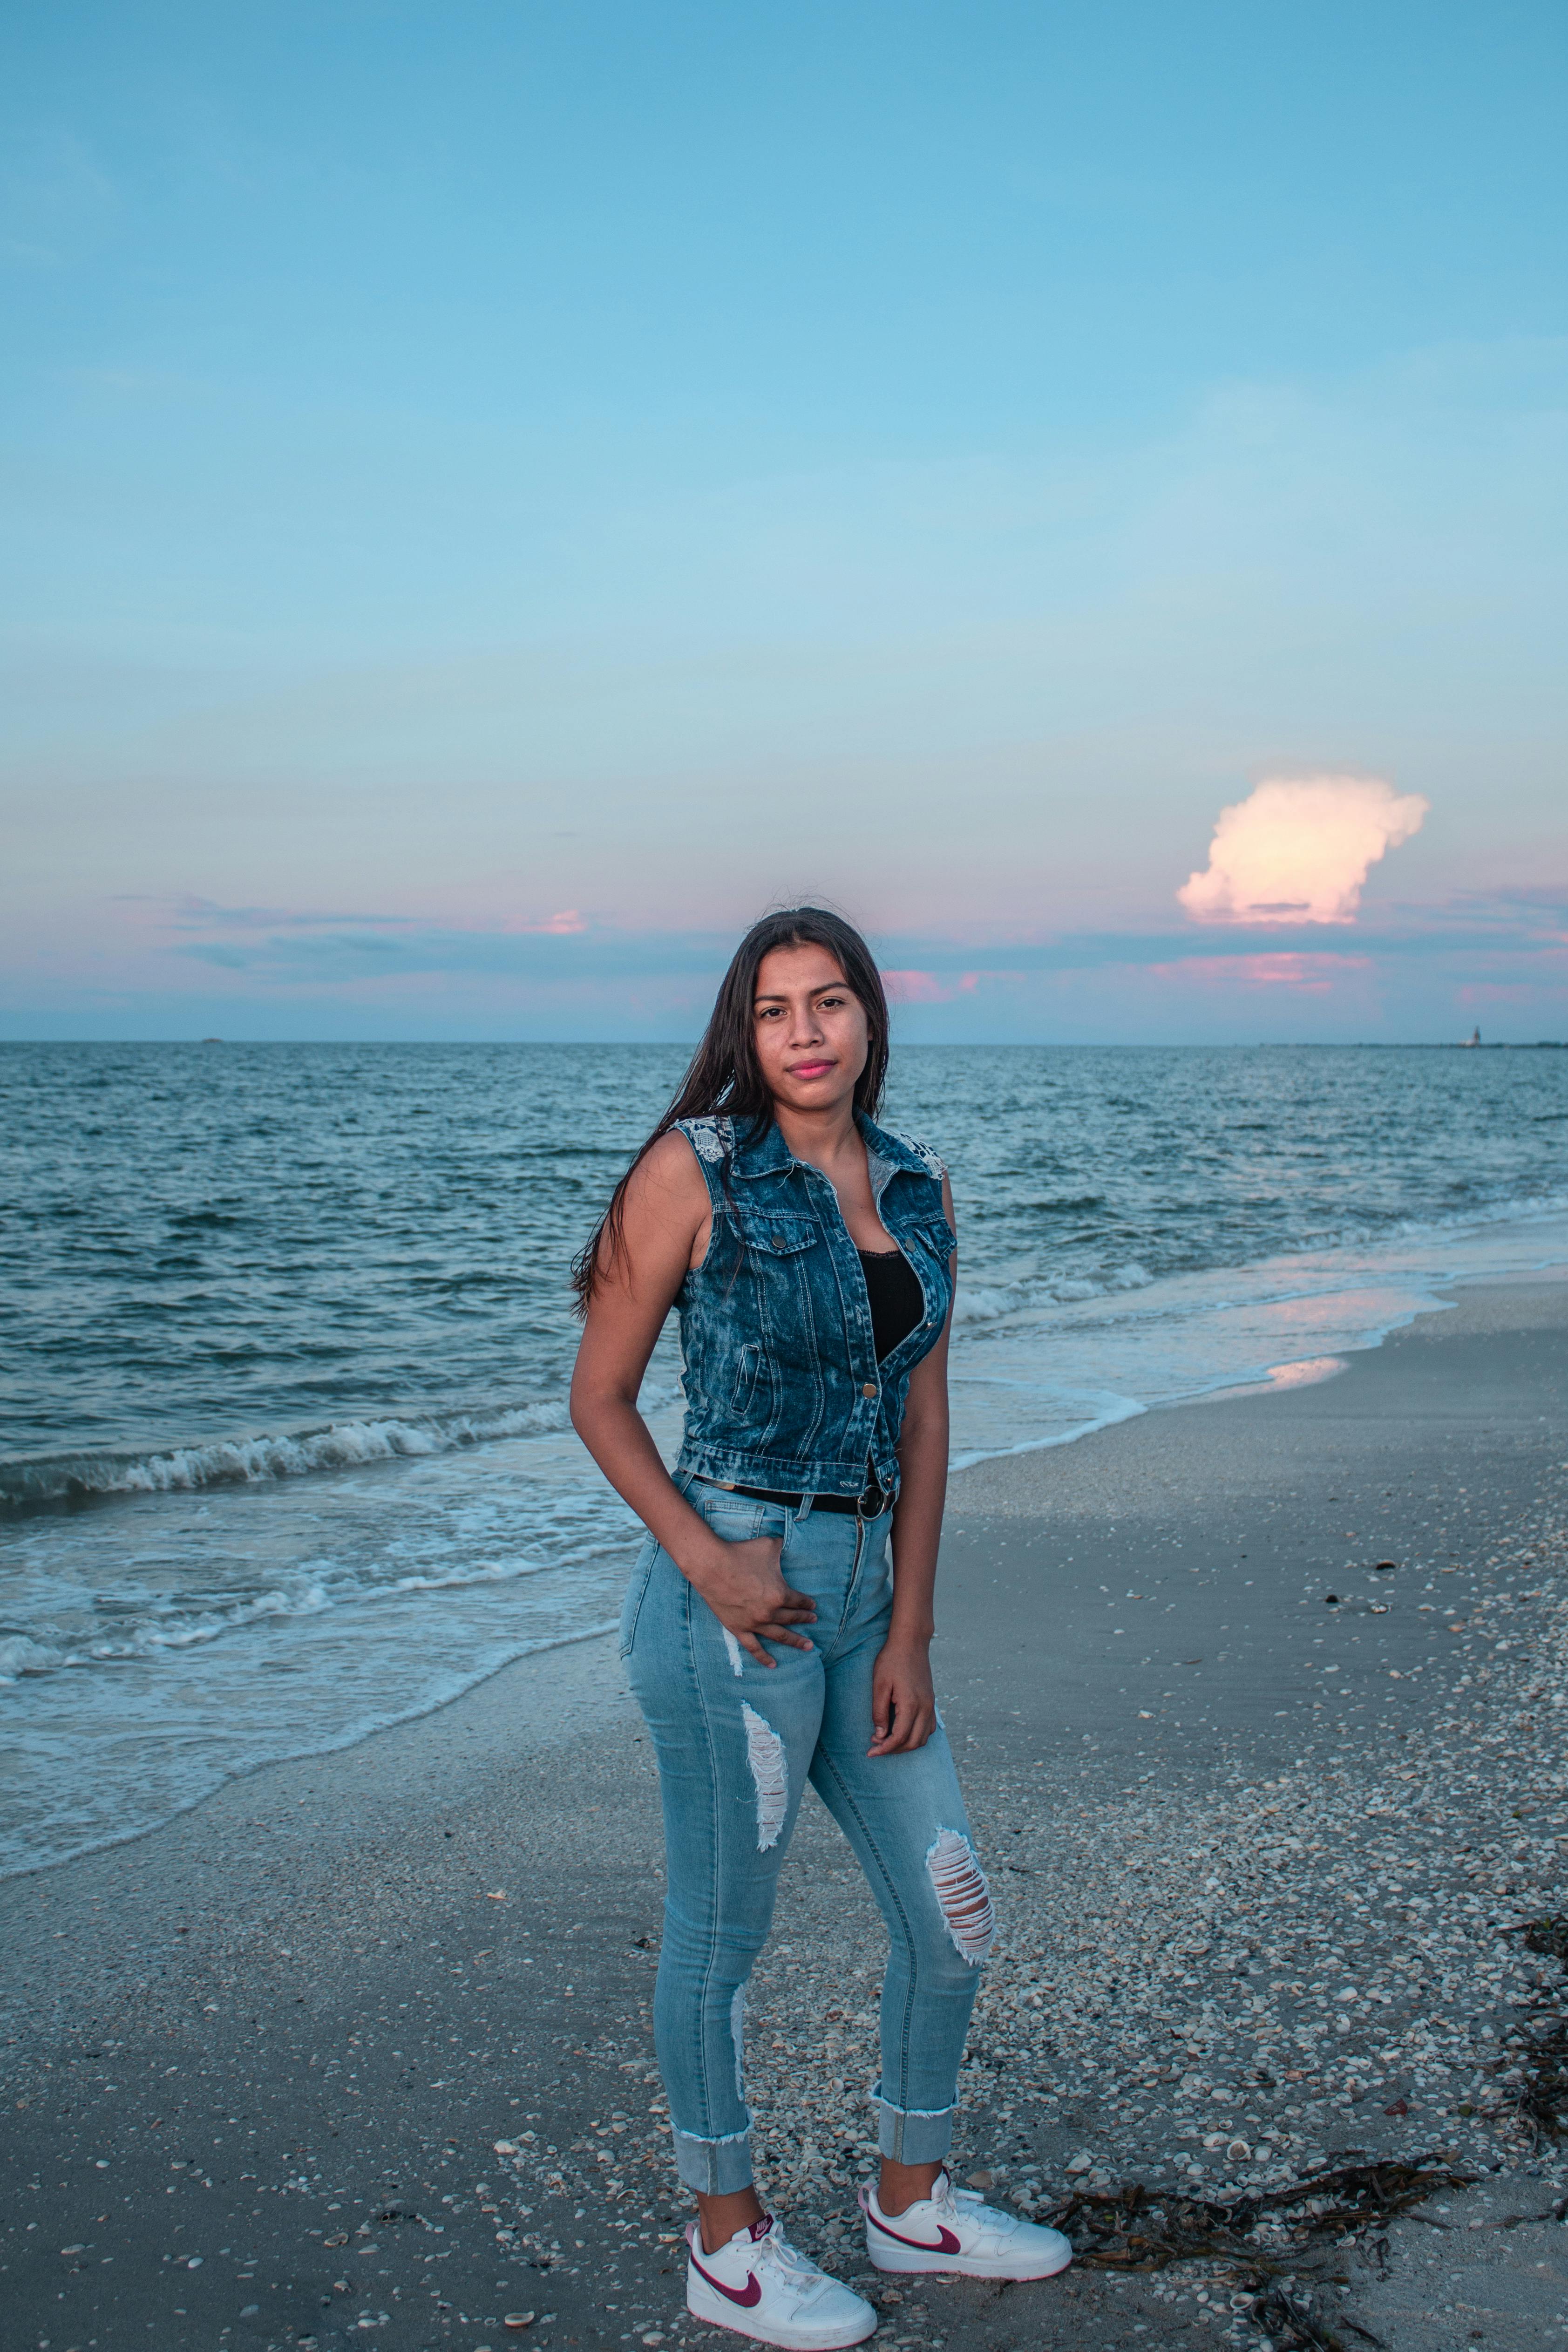 Barefoot Woman Jeans Sitting On Shore Stock Photo 434752246 | Shutterstock